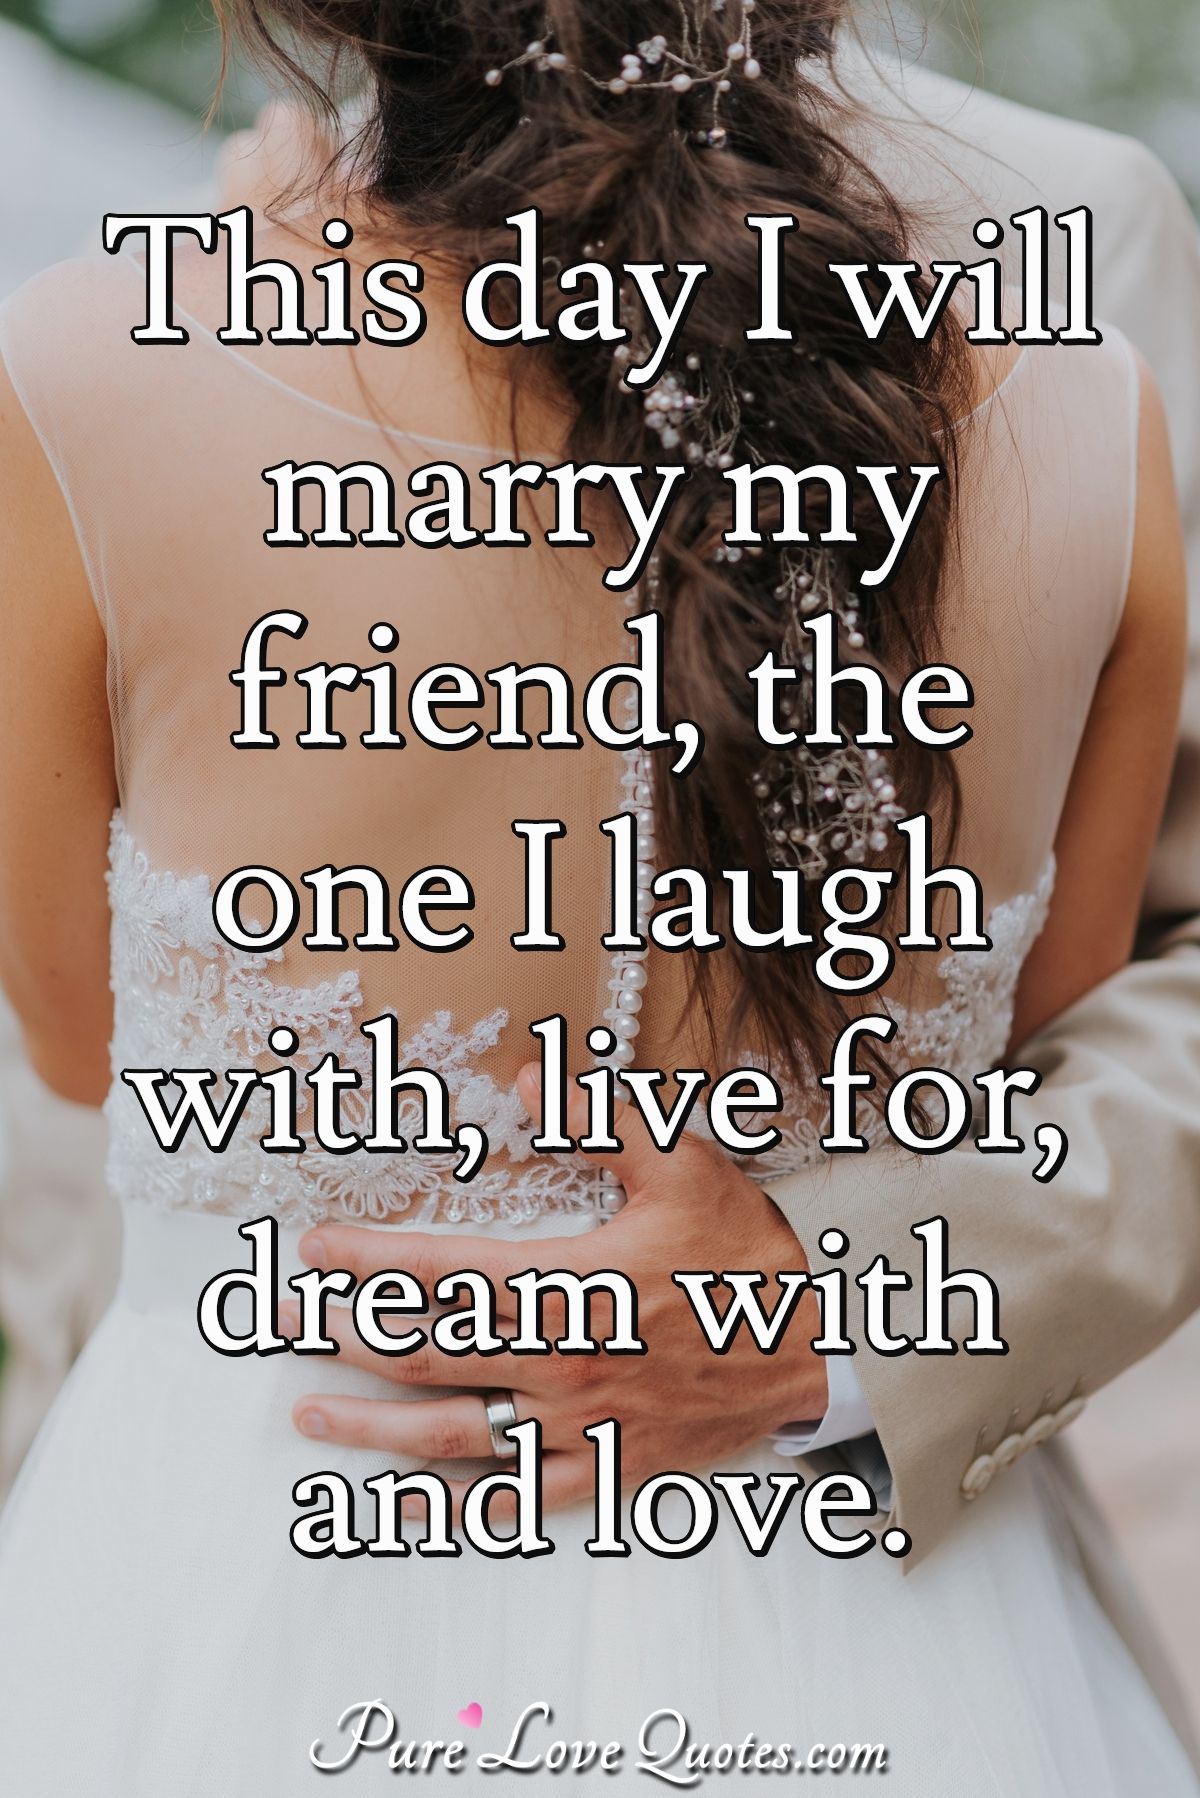 This day I will marry my friend, the one I laugh with